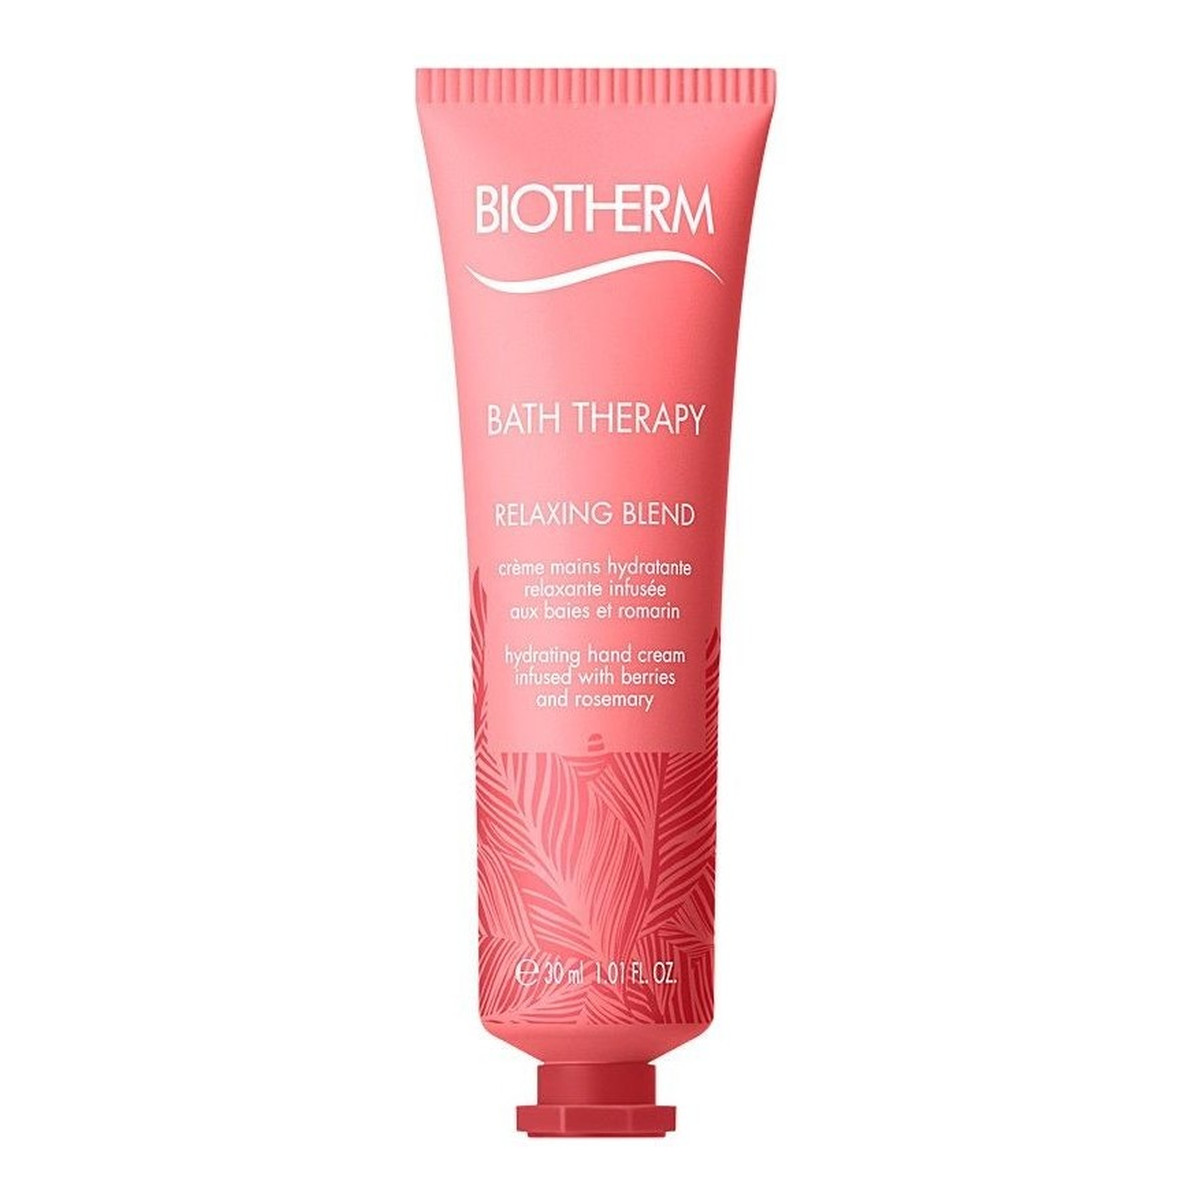 Biotherm Bath Therapy Relaxing Blend Hydrating krem do rąk Berries & Rosemary 30ml